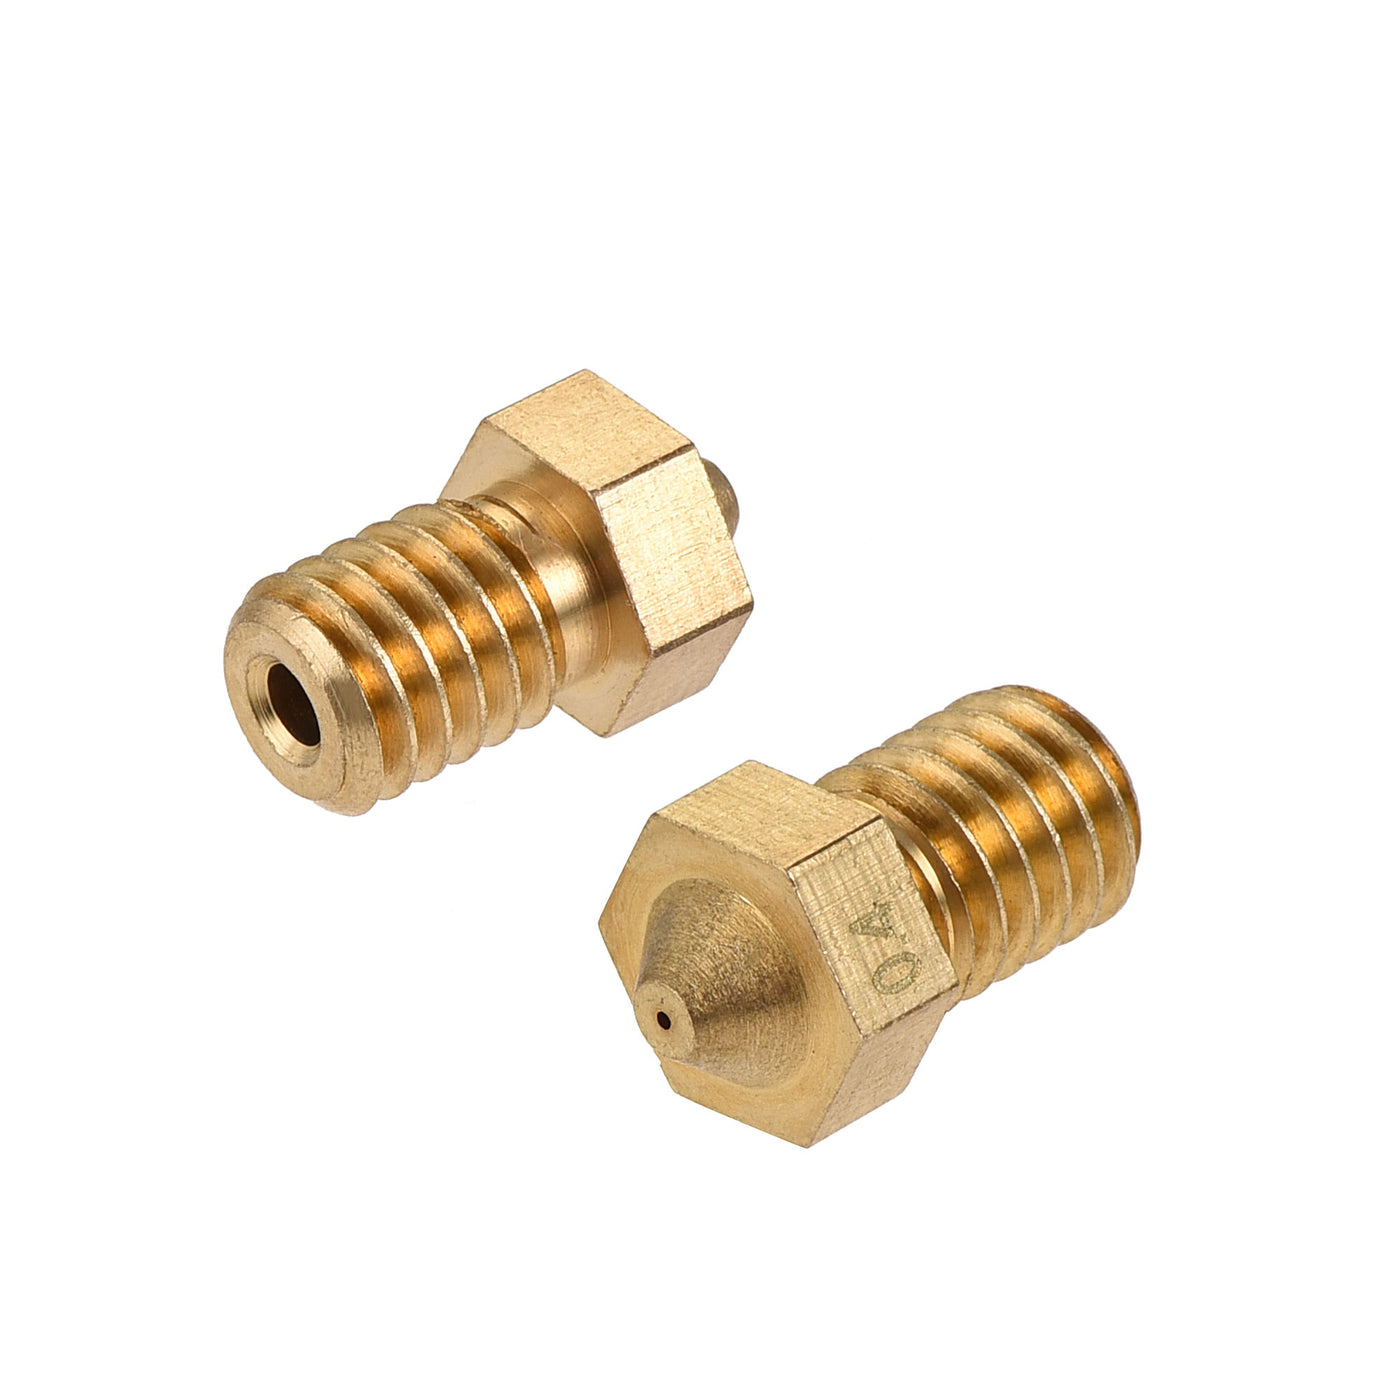 uxcell Uxcell 0.4mm 3D Printer Nozzle, 30pcs M6 Thread for V5 V6 1.75mm Extruder Print, Brass